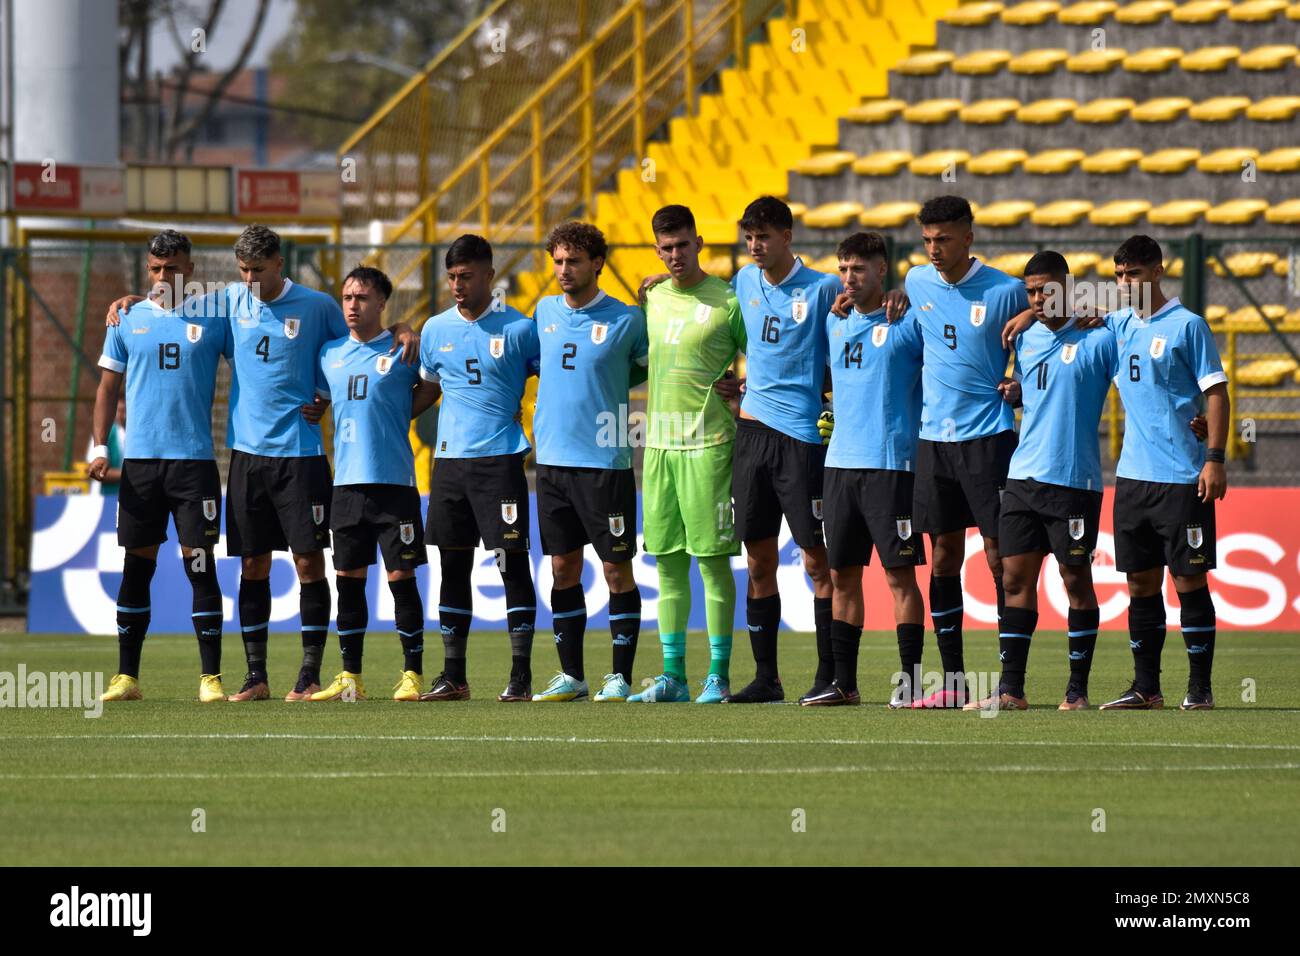 Bogota, Colombia. 03rd Feb, 2023. Uruguay's national team during the CONMEBOL South American Tournament match between  Ecuador and Uruguay, in Bogota, Colombia on February 3, 2023. Photo by: Cristian Bayona/Long Visual Press Credit: Long Visual Press/Alamy Live News Stock Photo